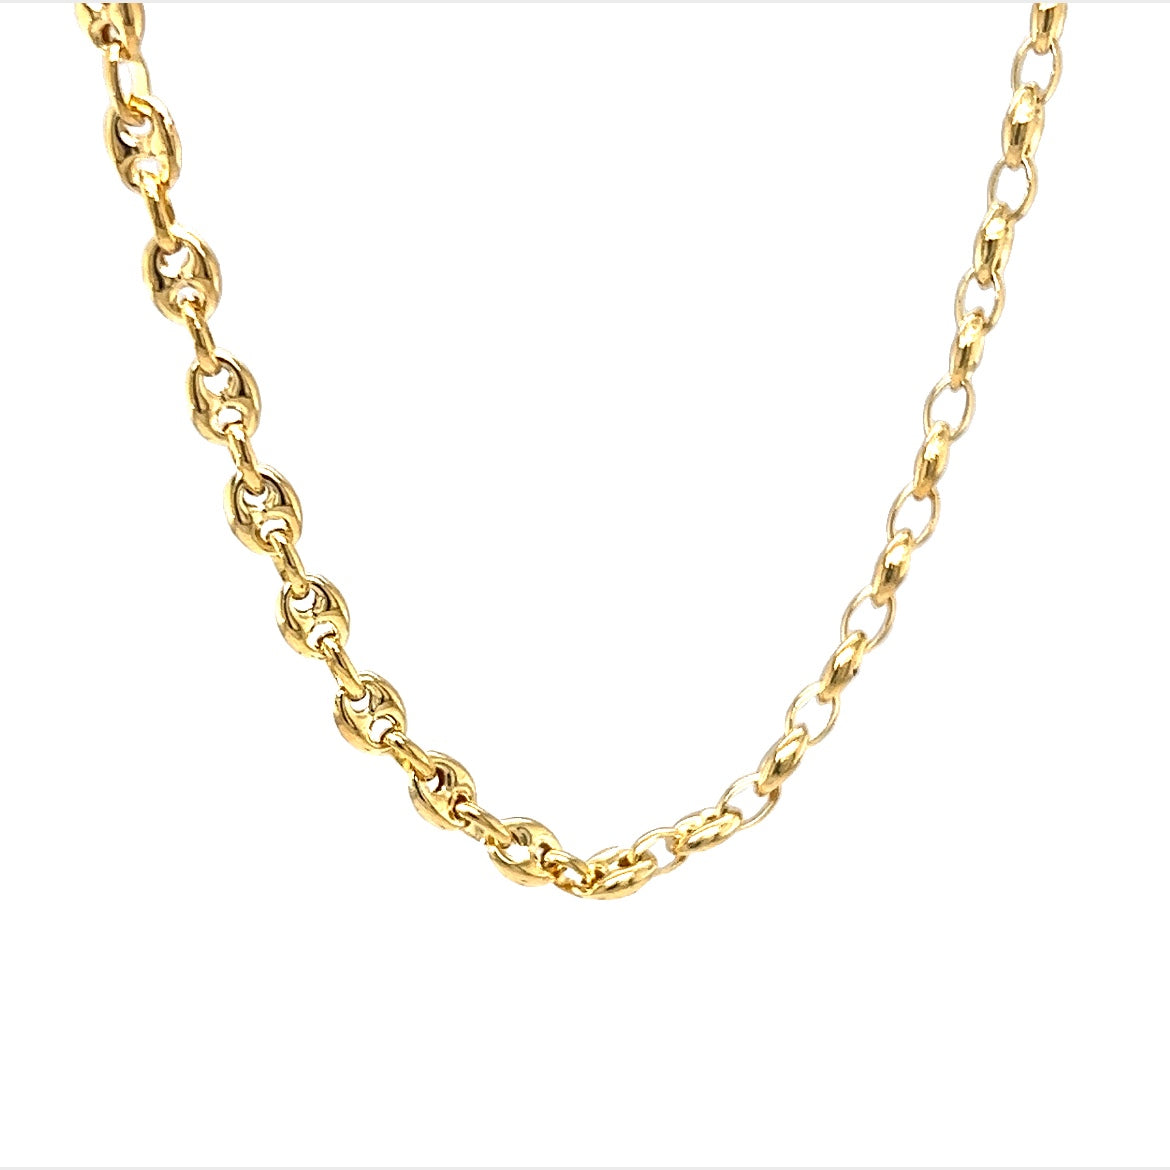 22 Inch Puffy Mariner Chain Necklace in 14k Yellow Gold